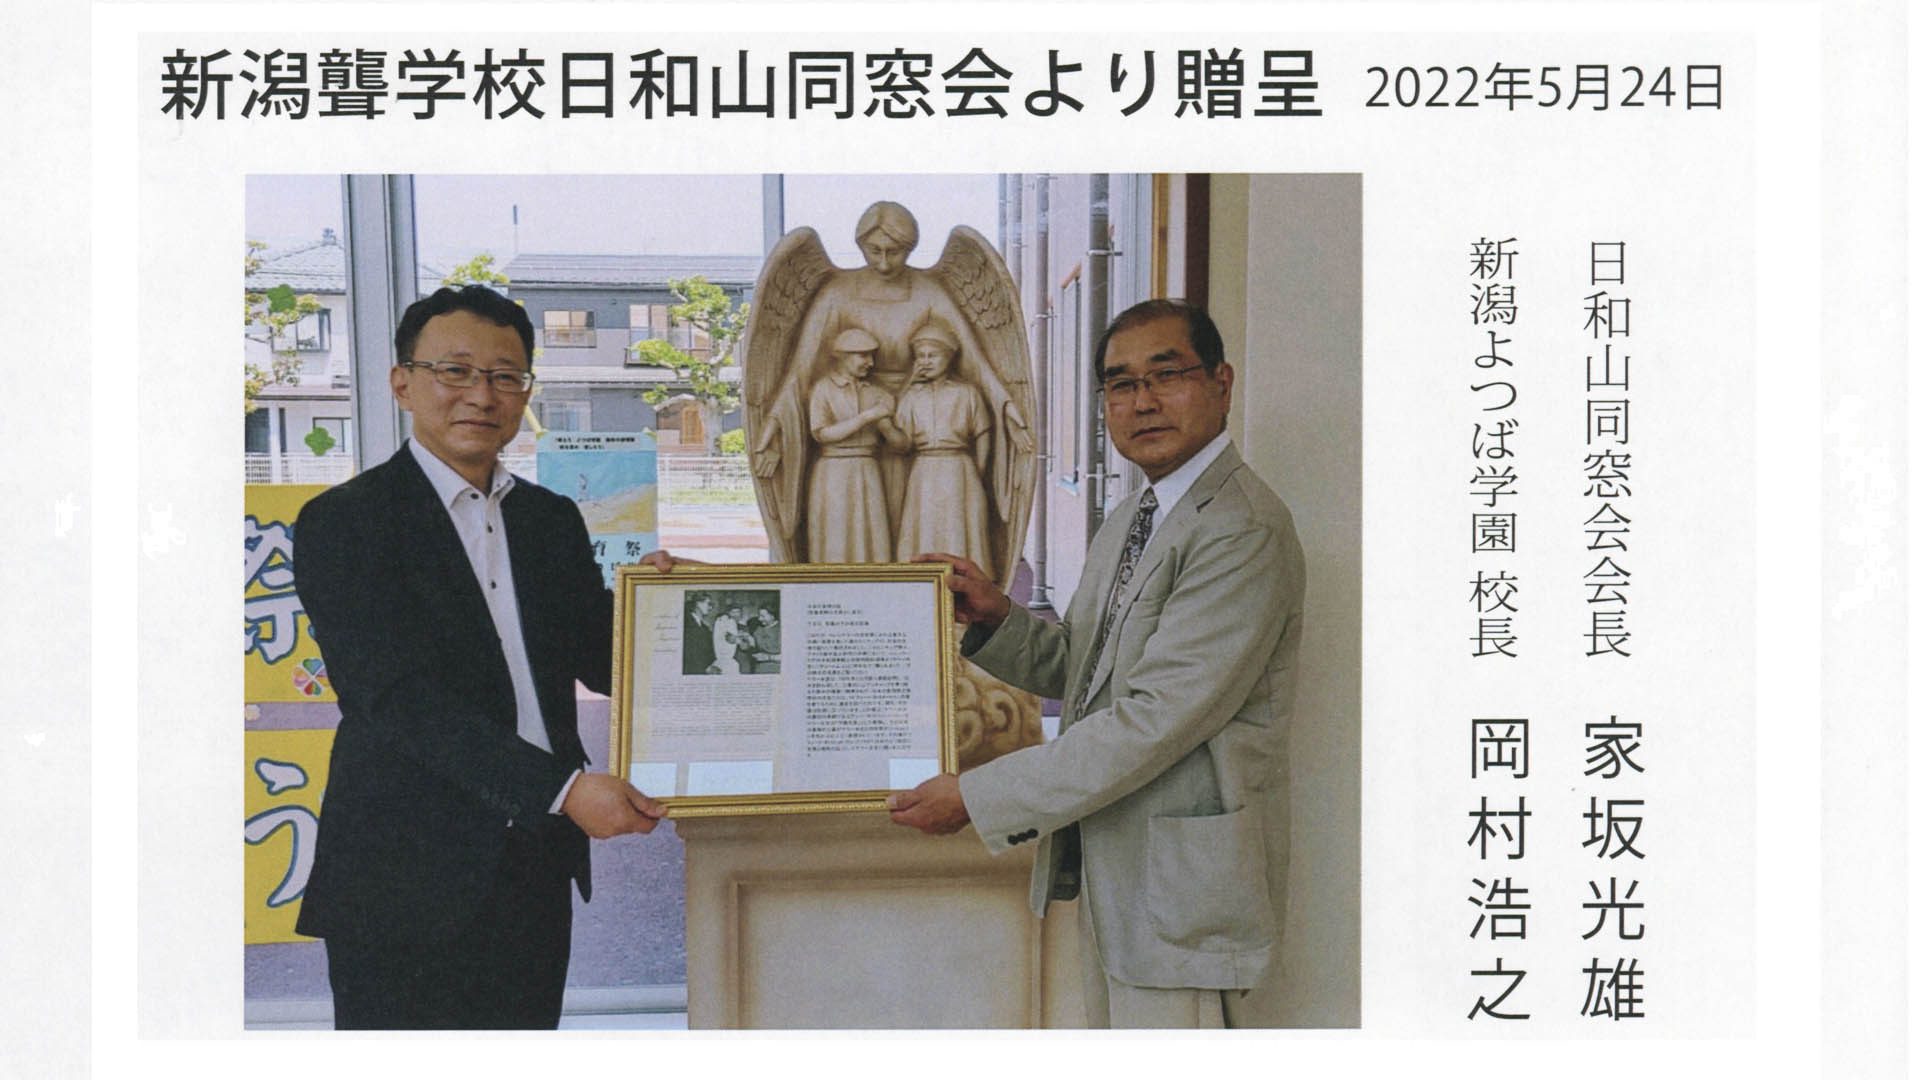 Two men stand in front of a 24” statue of Anne Sullivan, with the wings of an angel, embracing Helen Keller and Polly Thompson as they use the manual alphabet. The men hold a framed article in Japanese showing a similar statue being presented to Helen Keller. The photo is surrounded by text in the Japanese language.